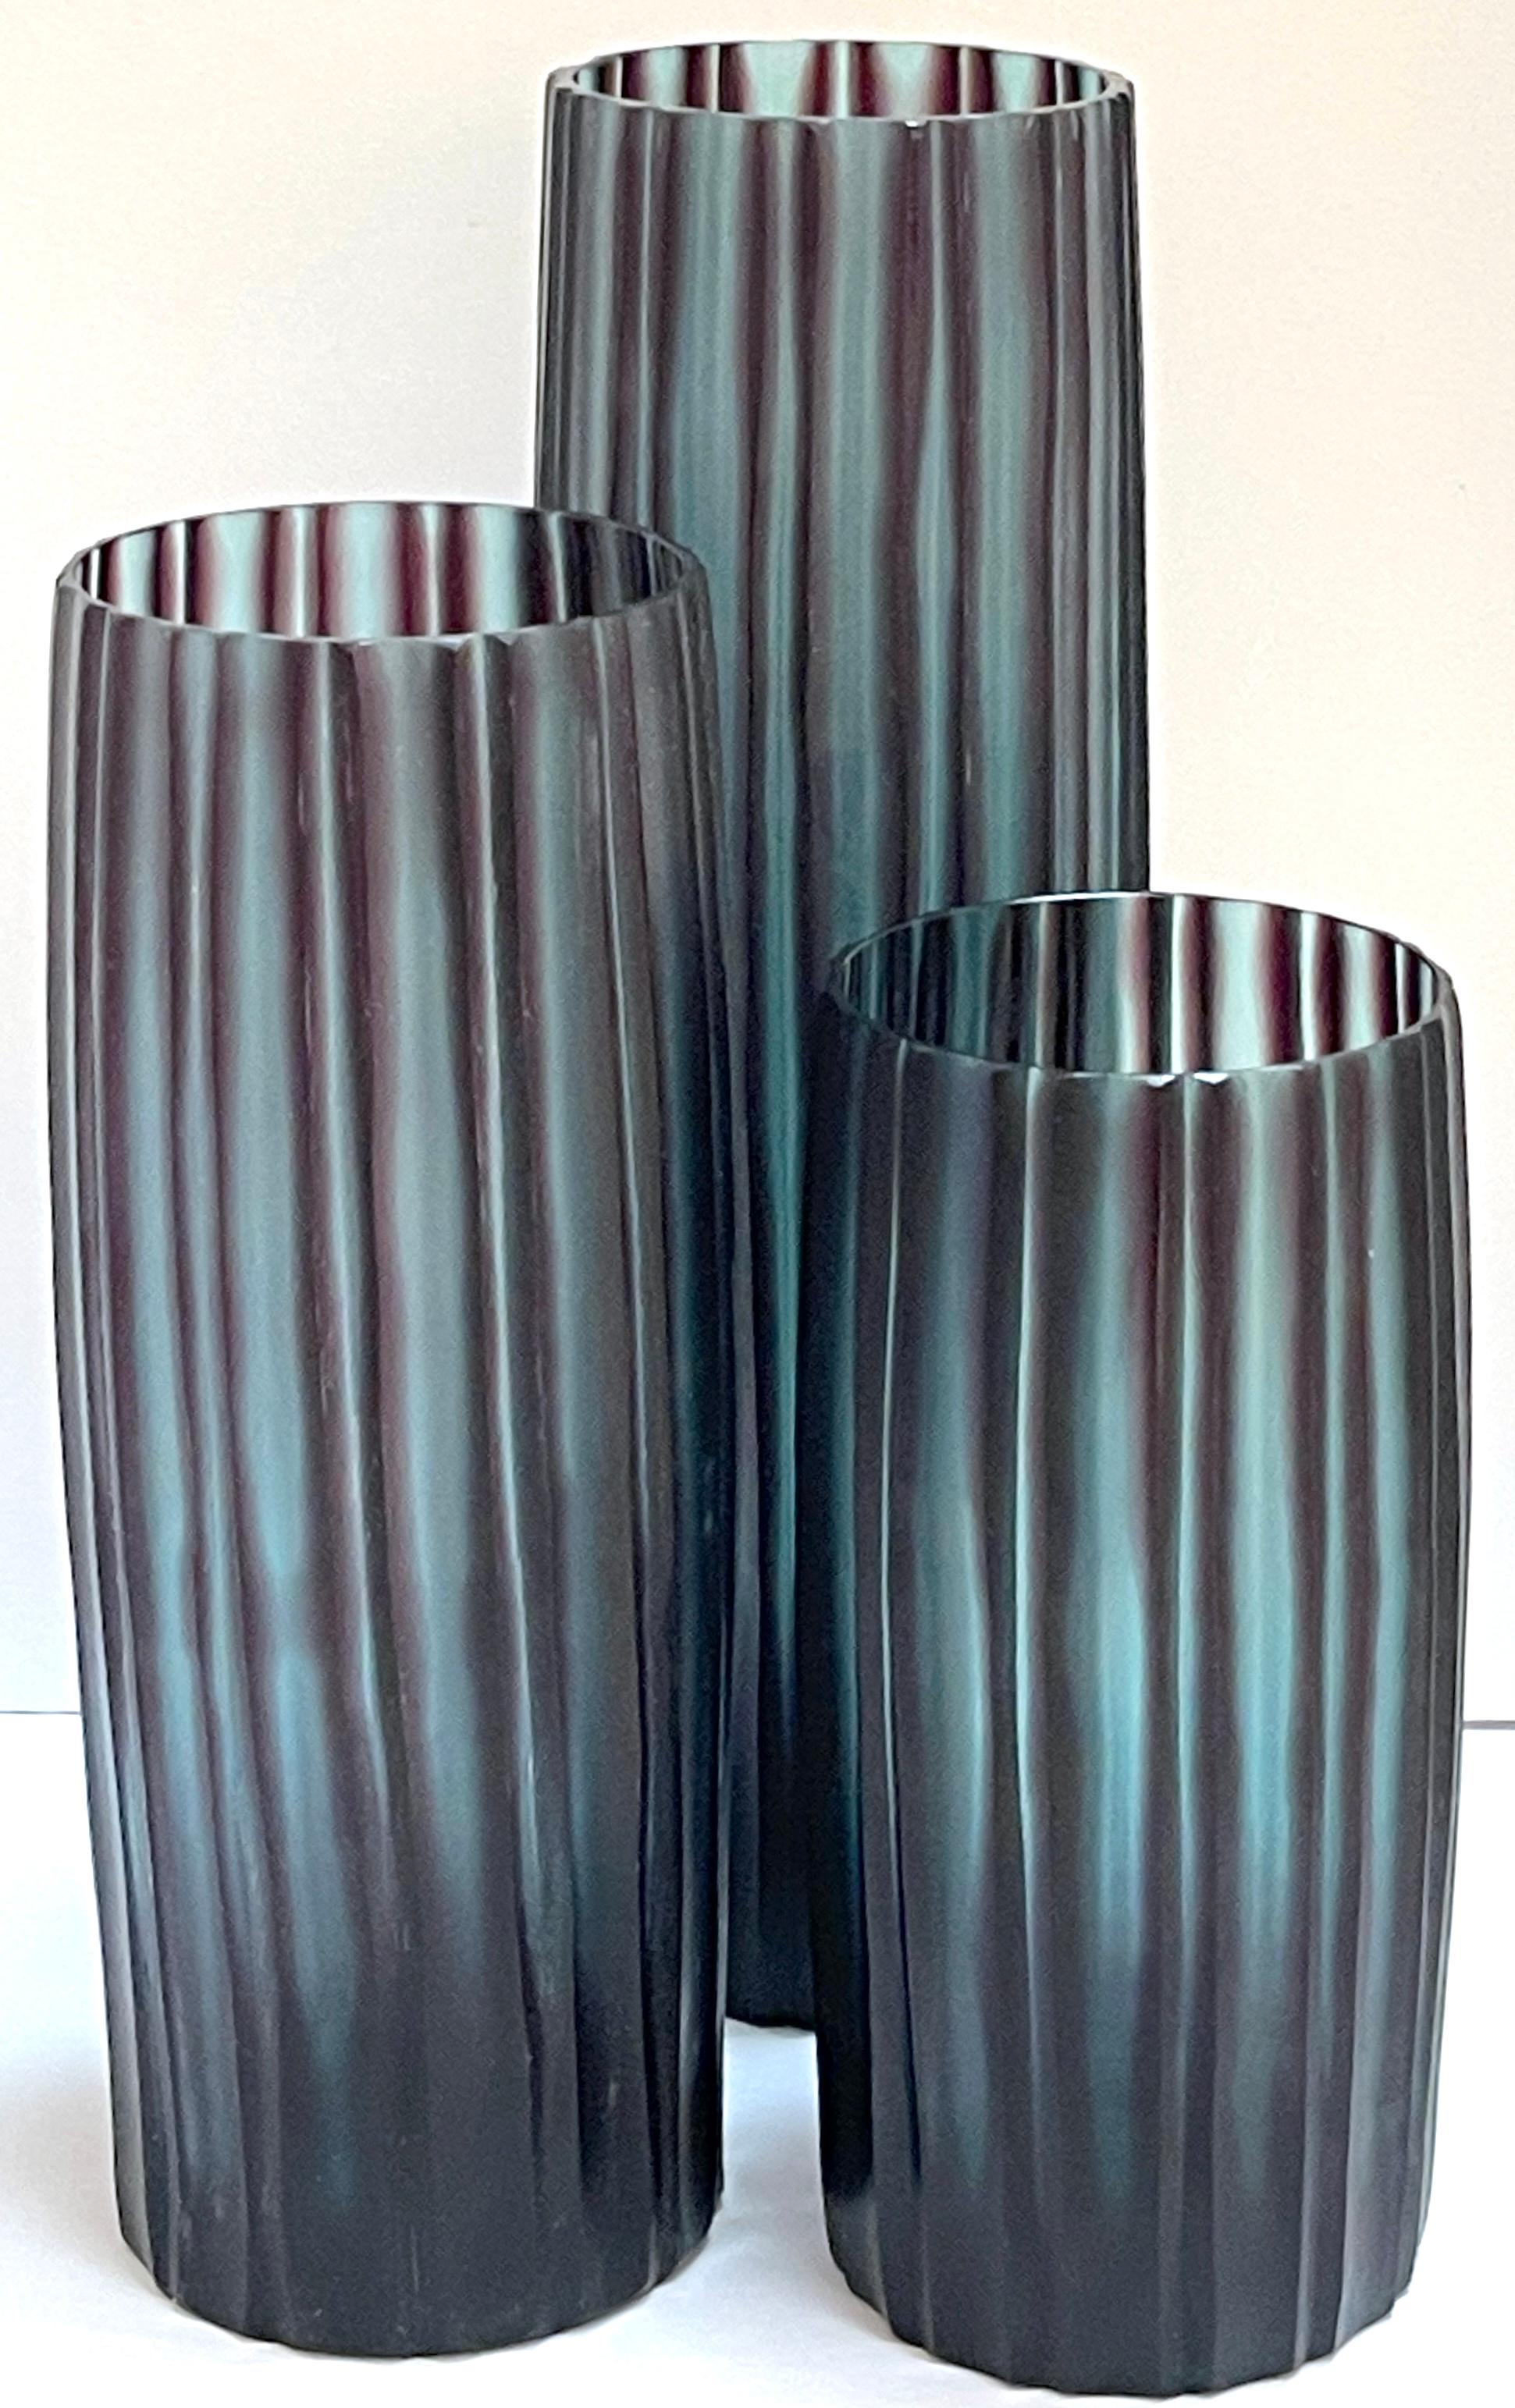 Trio of Donghia Carved Murano Glass 'Bamboo' Vases
Italy, circa 1990s 

A trio of exquisite Donghia-carved Murano glass 'Bamboo' vases from Italy in the 1990s. This stunning ensemble comprises three elegantly crafted vases, each depicting a modern